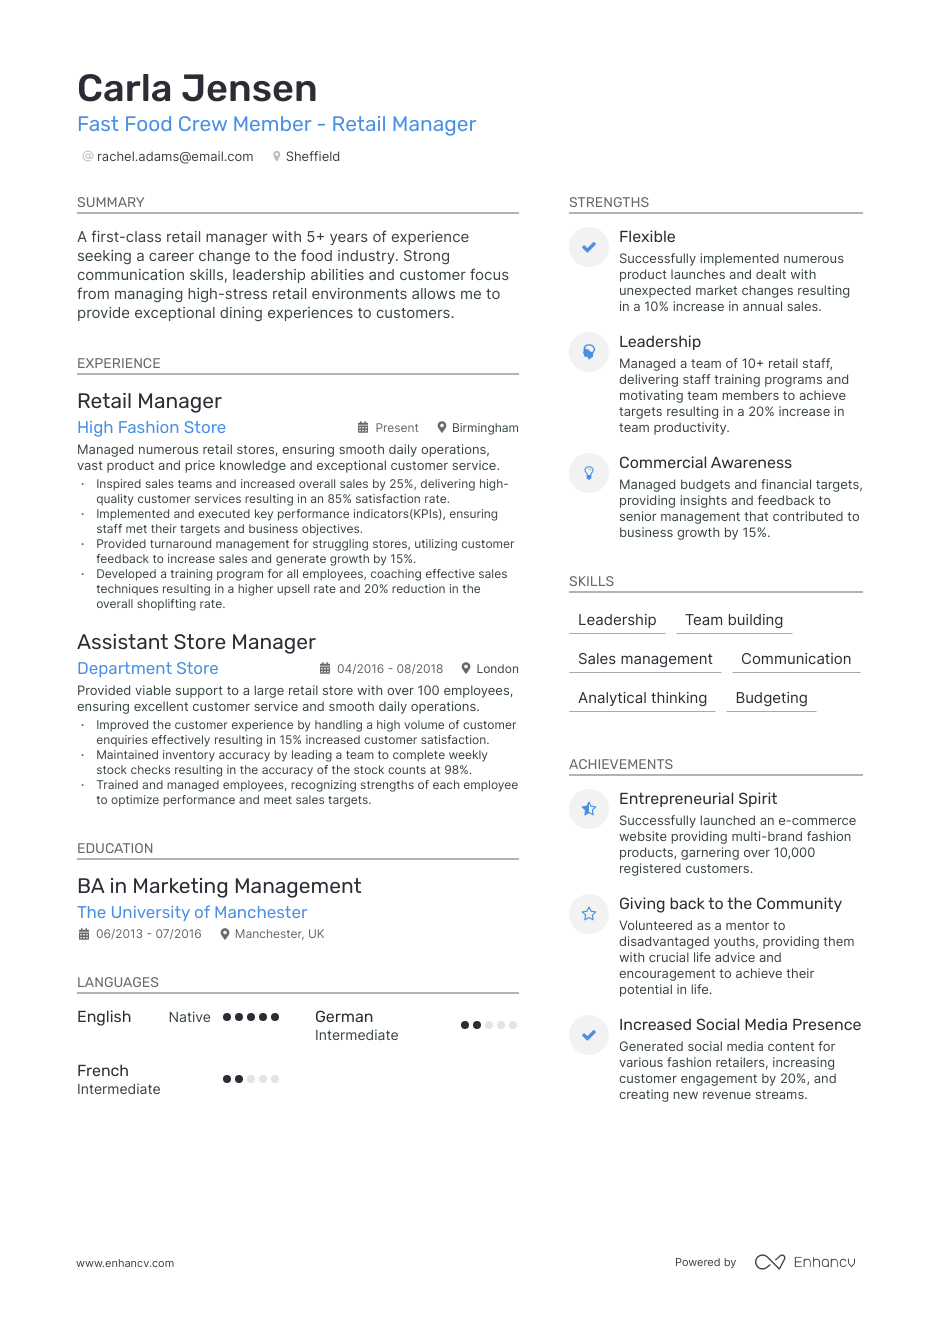 Transitioning Factory Worker CV example